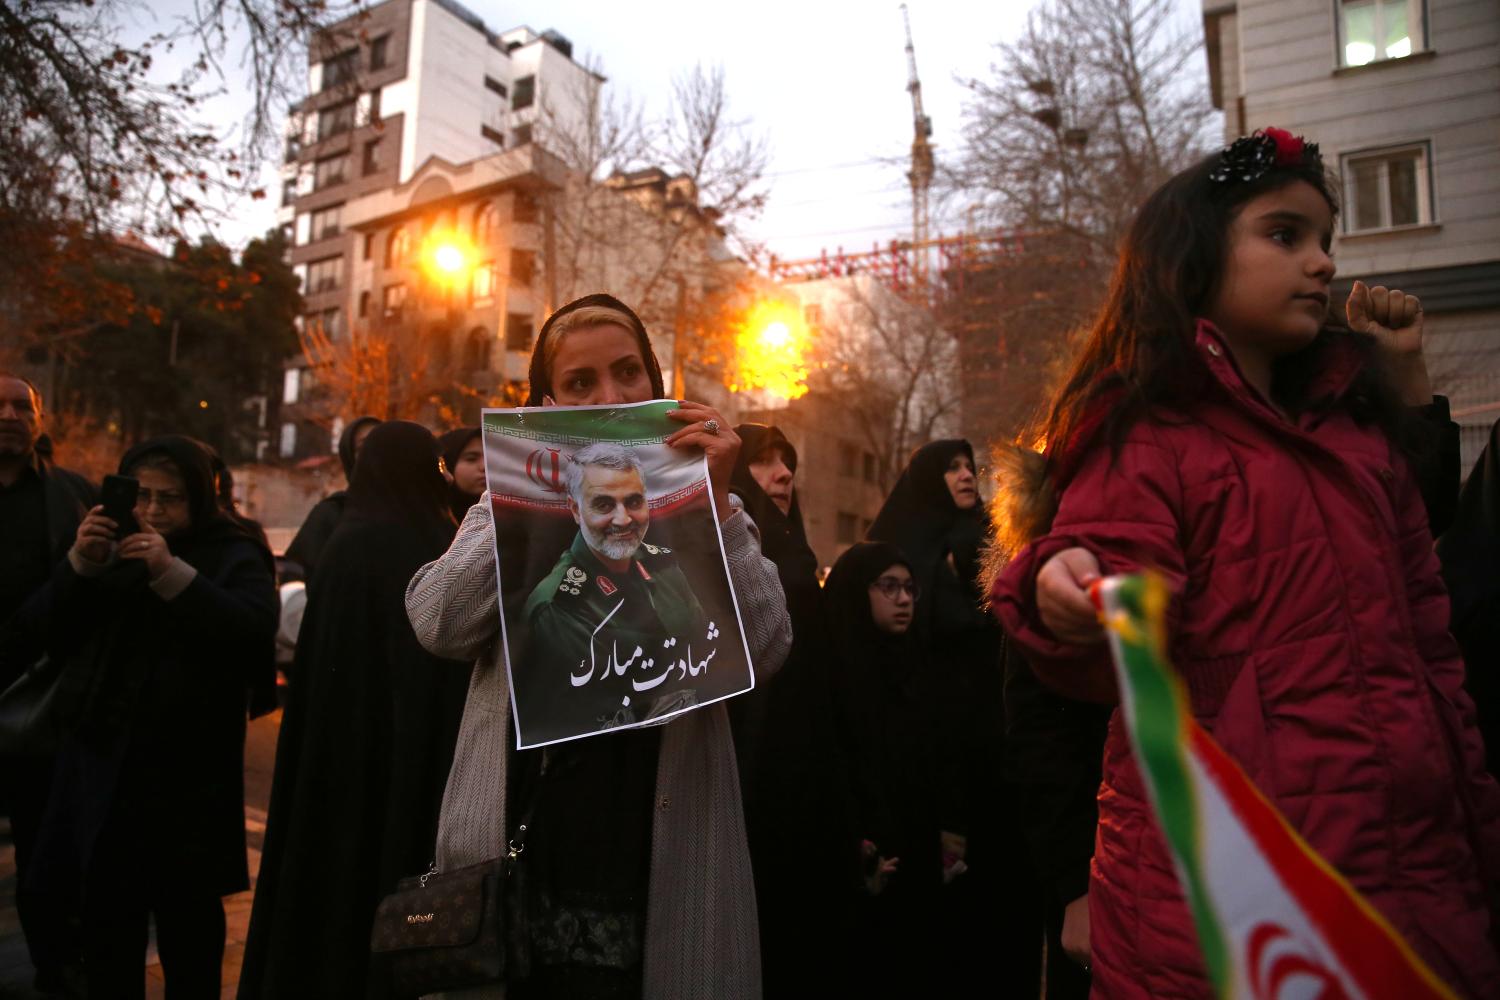 An Iranian demonstrator holds a picture of the late Iranian Major-General Qassem Soleimani, during a protest against the assassination of Soleimani, head of the elite Quds Force, and Iraqi militia commander Abu Mahdi al-Muhandis, who were killed in an air strike at Baghdad airport, in front of United Nation office in Tehran, Iran January 3, 2020. Nazanin Tabatabaee/WANA (West Asia News Agency) via REUTERS ATTENTION EDITORS - THIS IMAGE HAS BEEN SUPPLIED BY A THIRD PARTY.